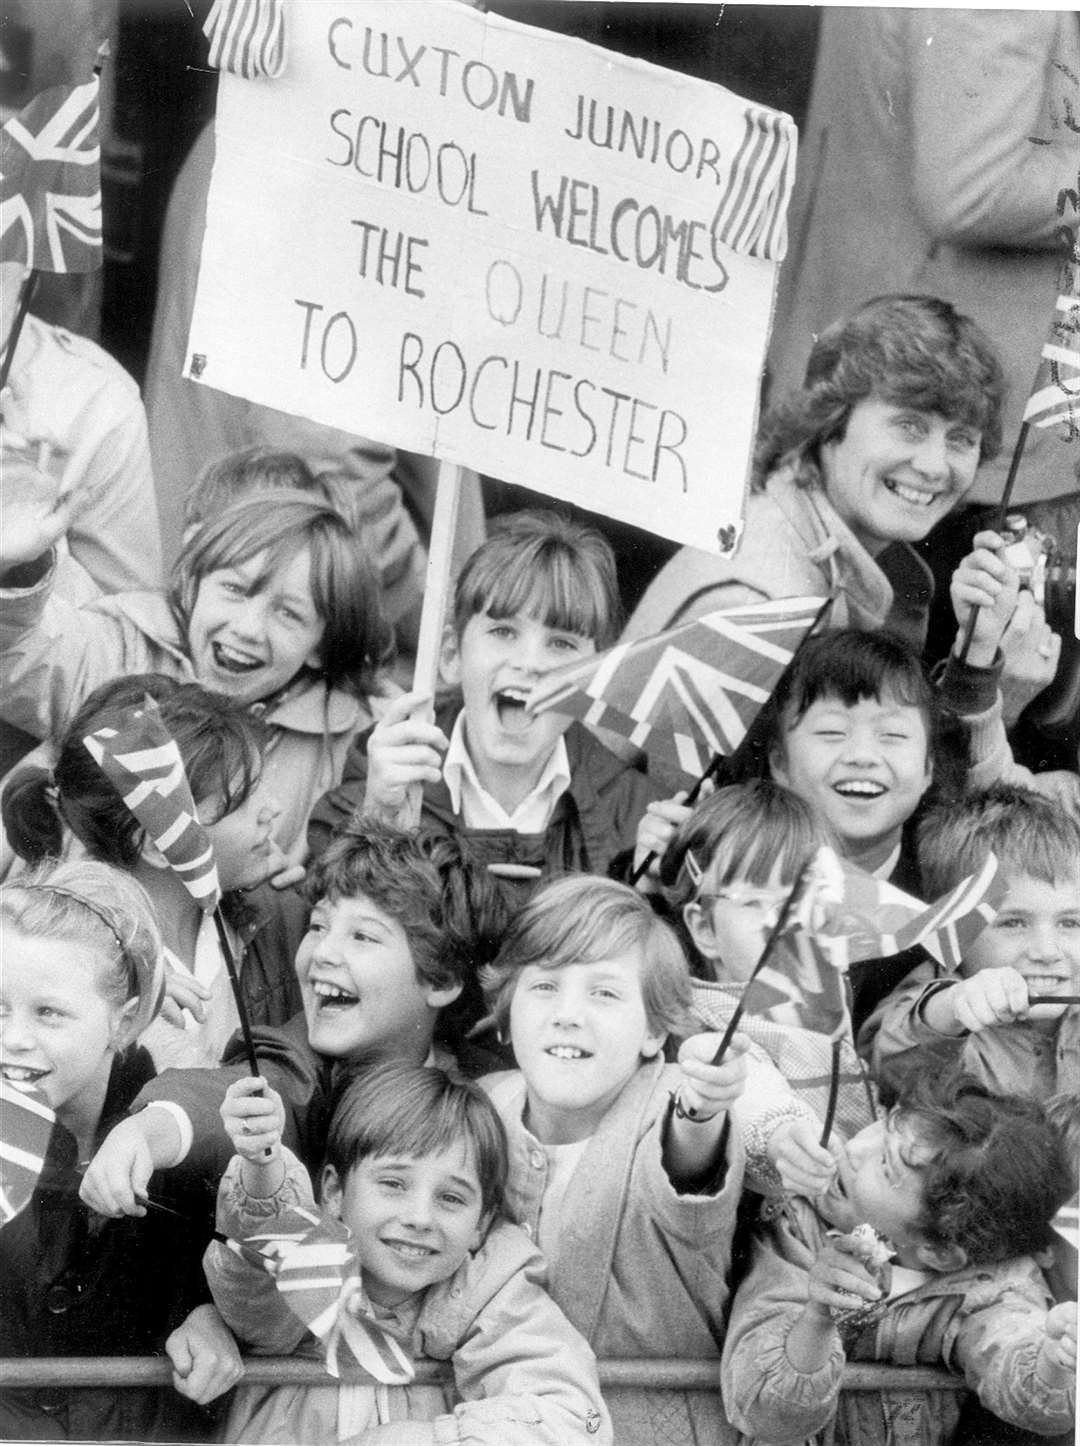 Pupils from Cuxton Junior School were ecstatic at the Queen's visit to Rochester in October 1984.